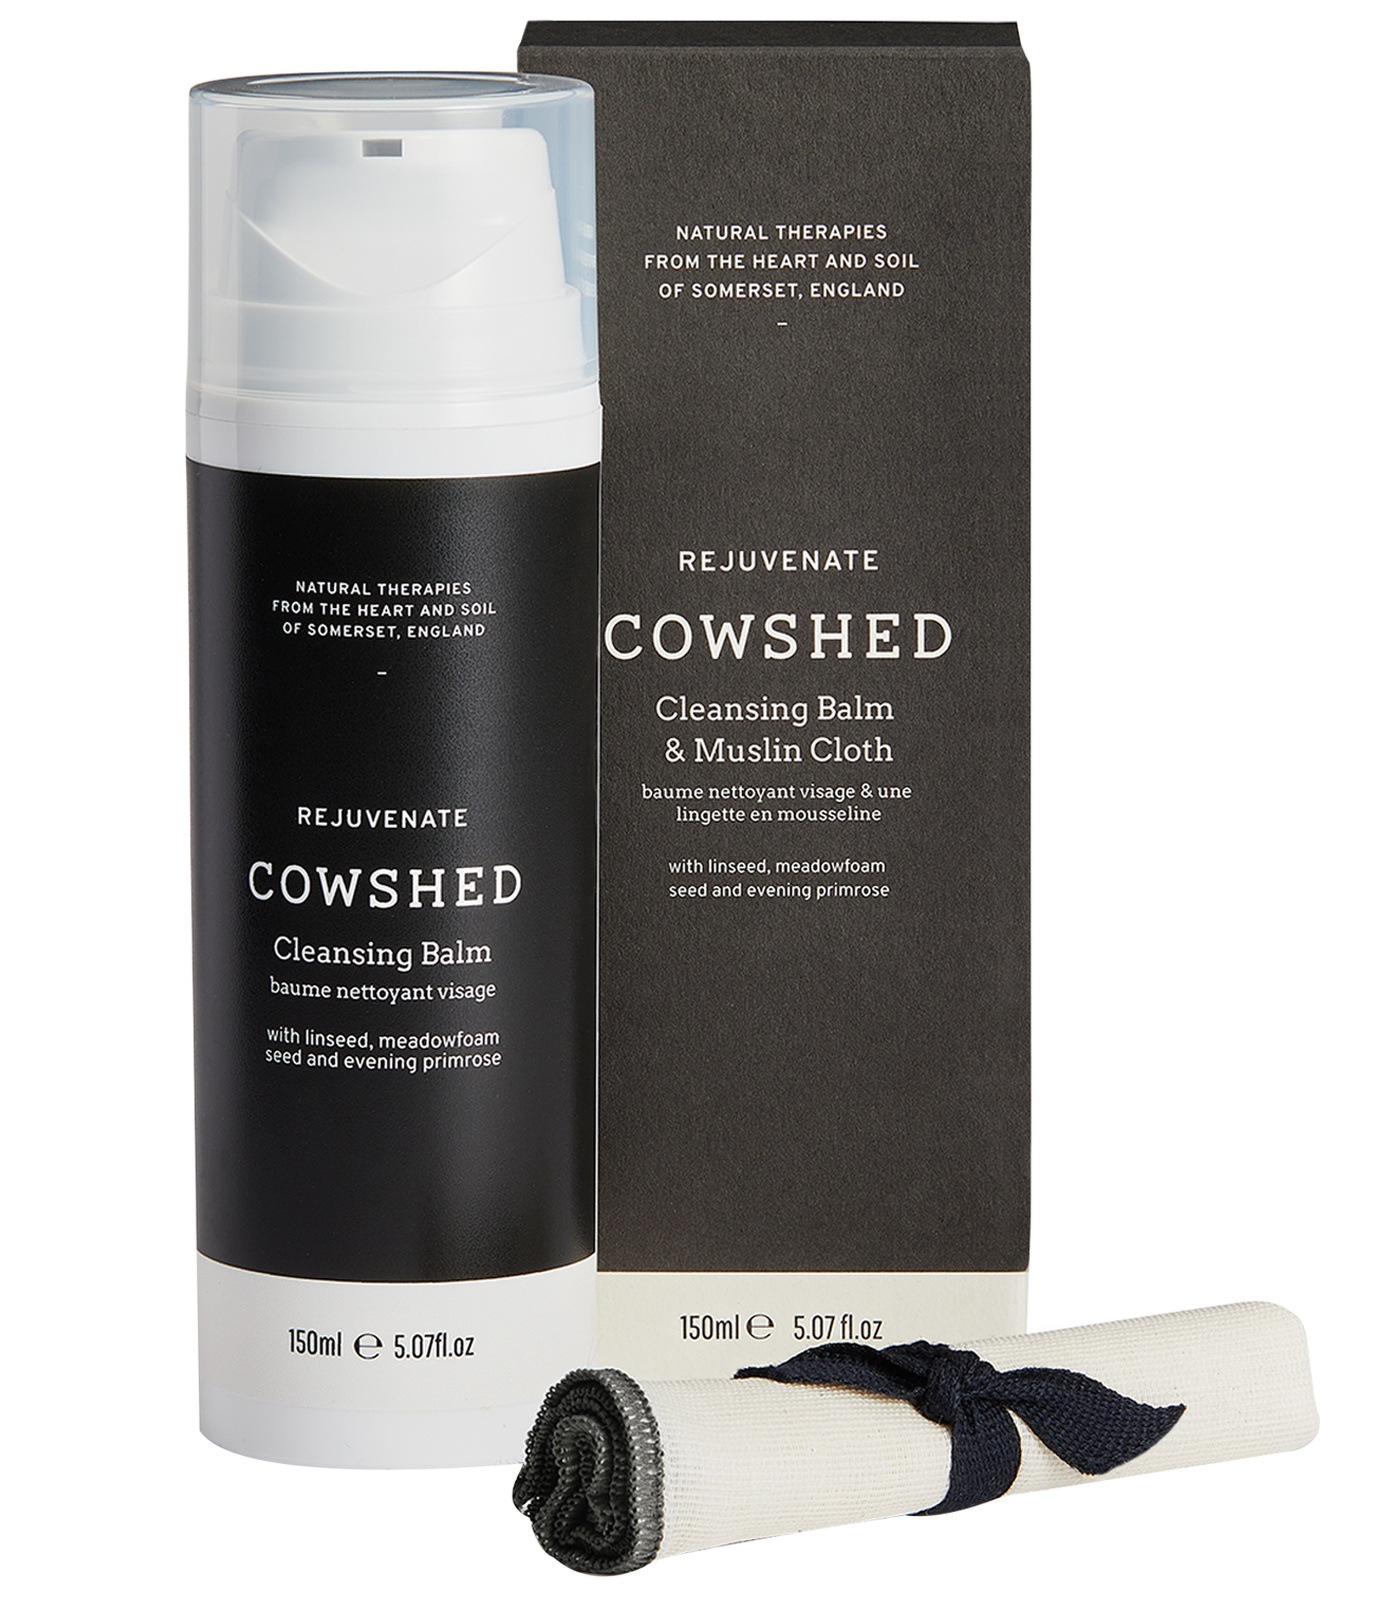 Cowshed Cleansing Balm